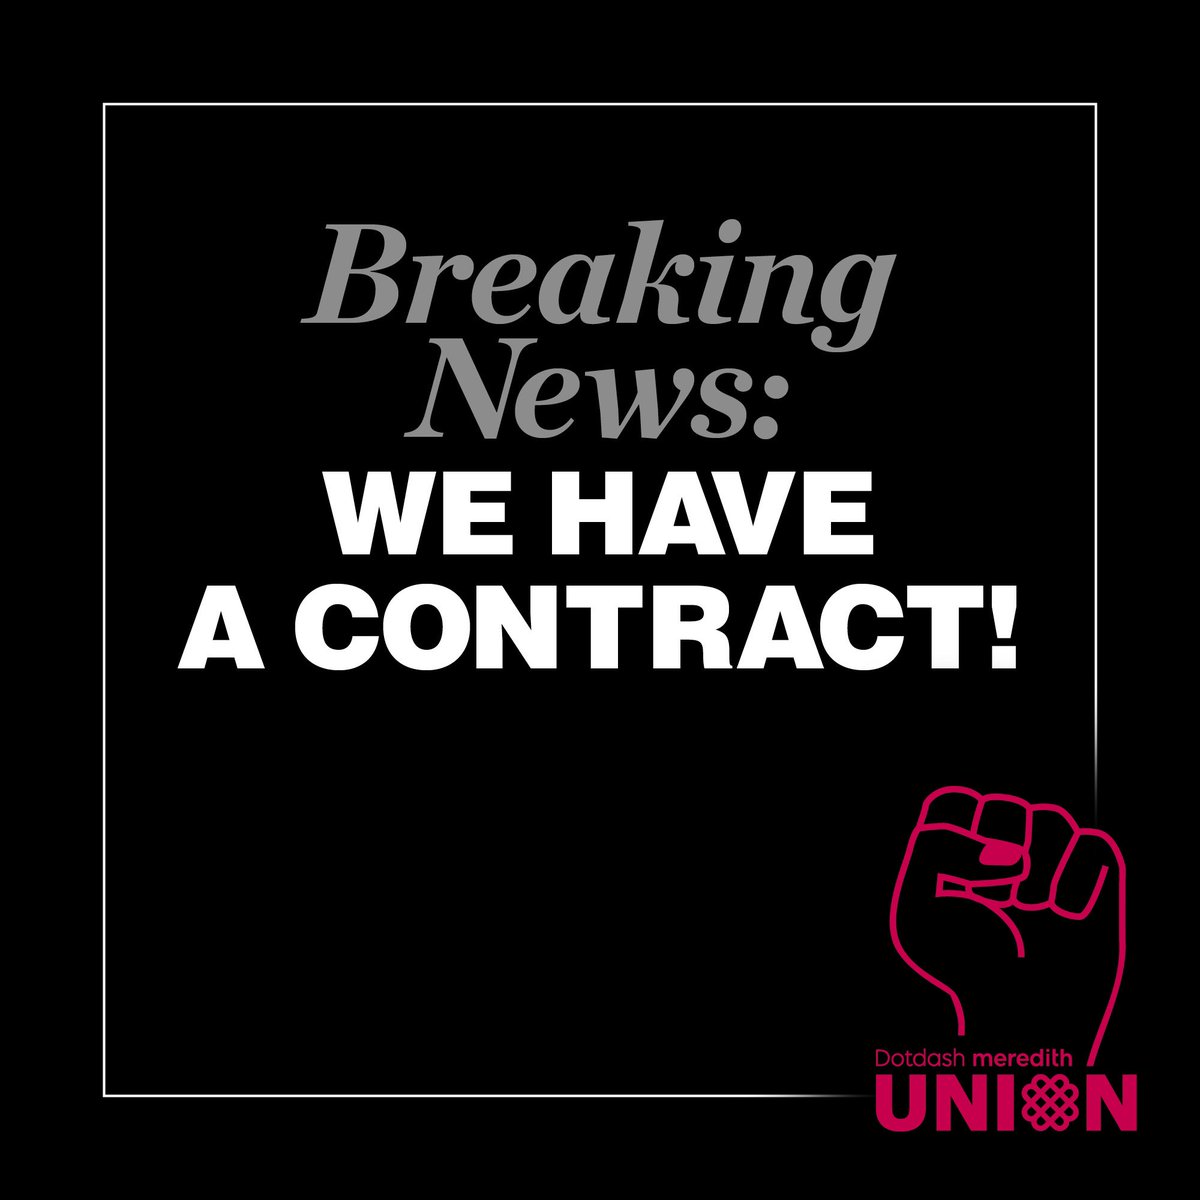 Yesterday, @dotdashmeredith editorial workers @People, People video, @EW and @marthaliving UNANIMOUSLY voted YES to ratify their contract. Many thanks go to our talented pals @nyguild. And congrats to our union siblings @condeunion —thanks for the inspo and support!